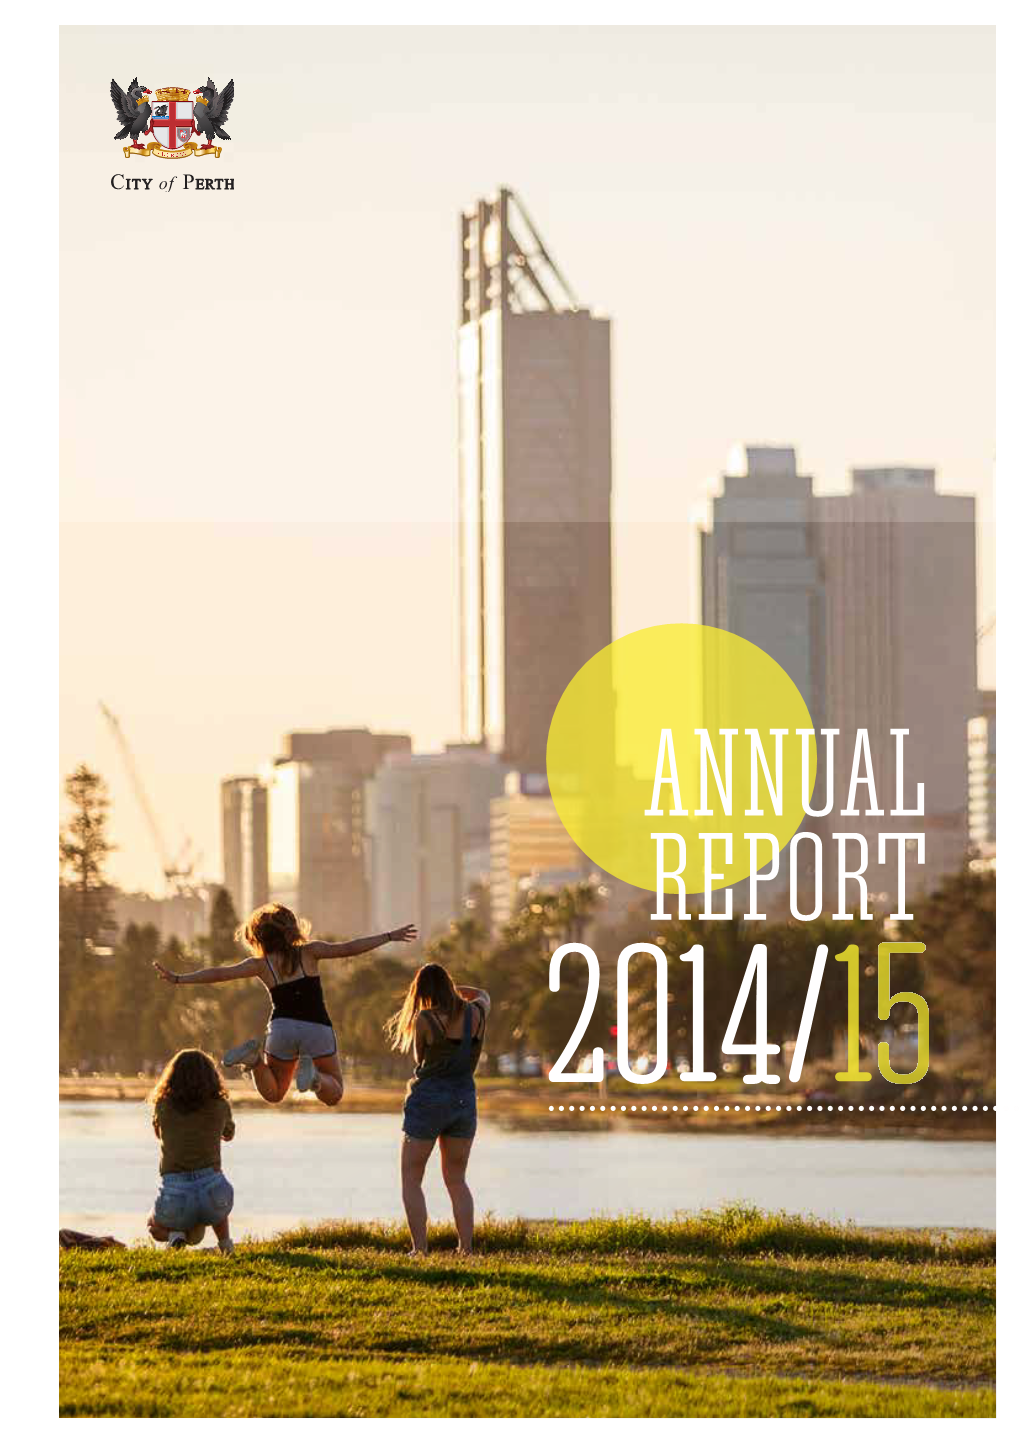 ANNUAL REPORT PERTH IS RENOWNED AS an ACCESSIBLE CITY It Is Alive with Urban Green Networks That Are Safe and Vibrant